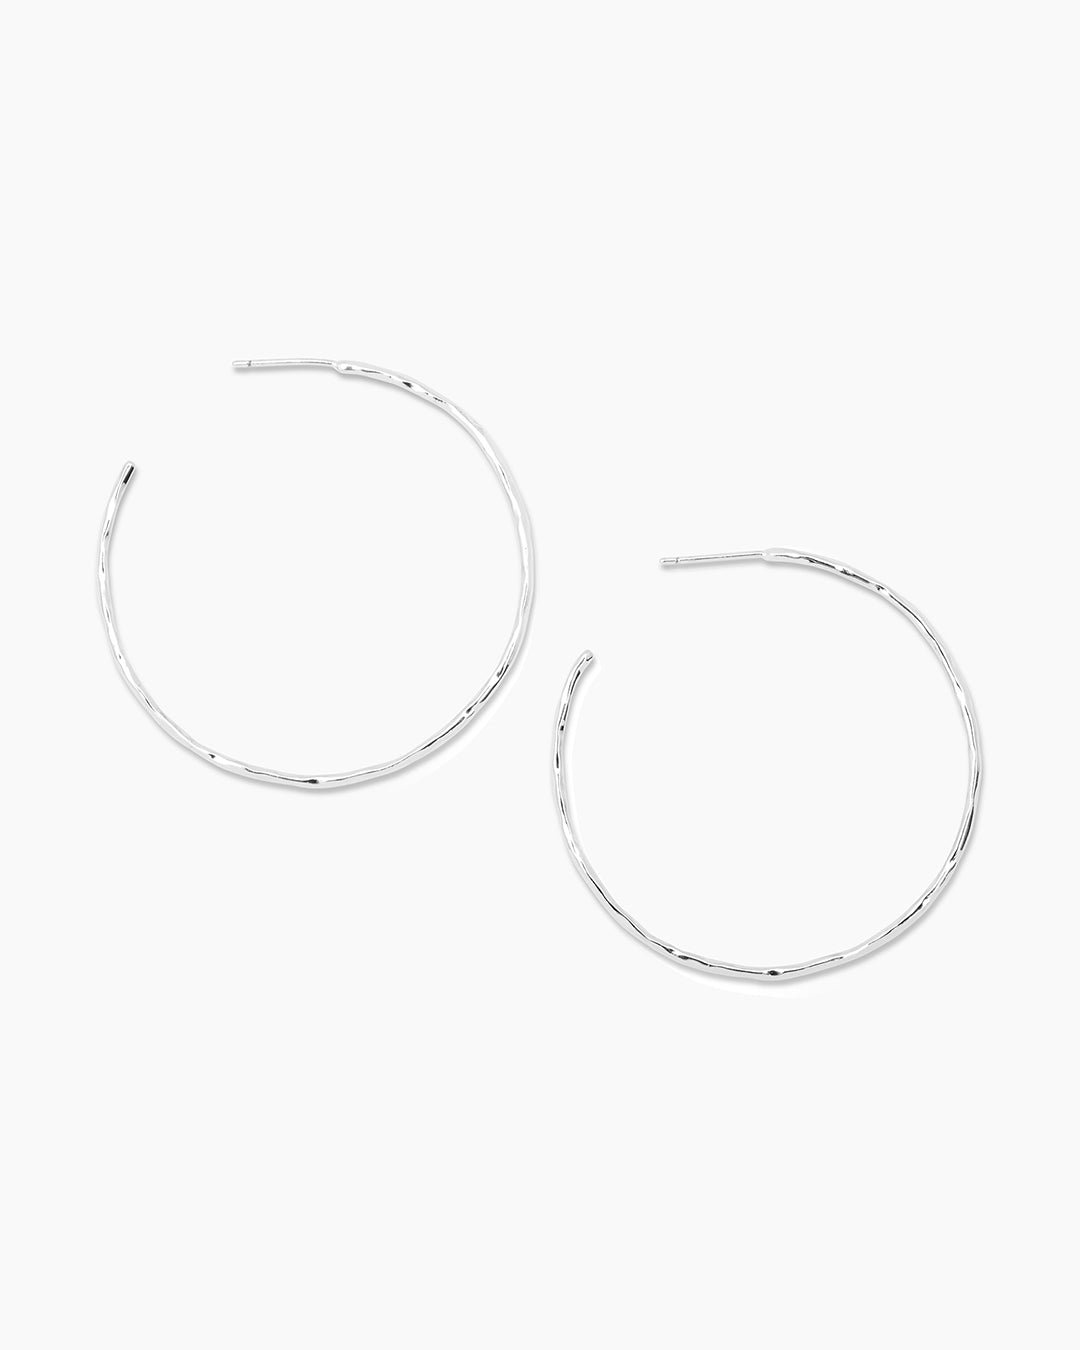  Taner Thin hoops, medium sized hoops || option::Silver Plated